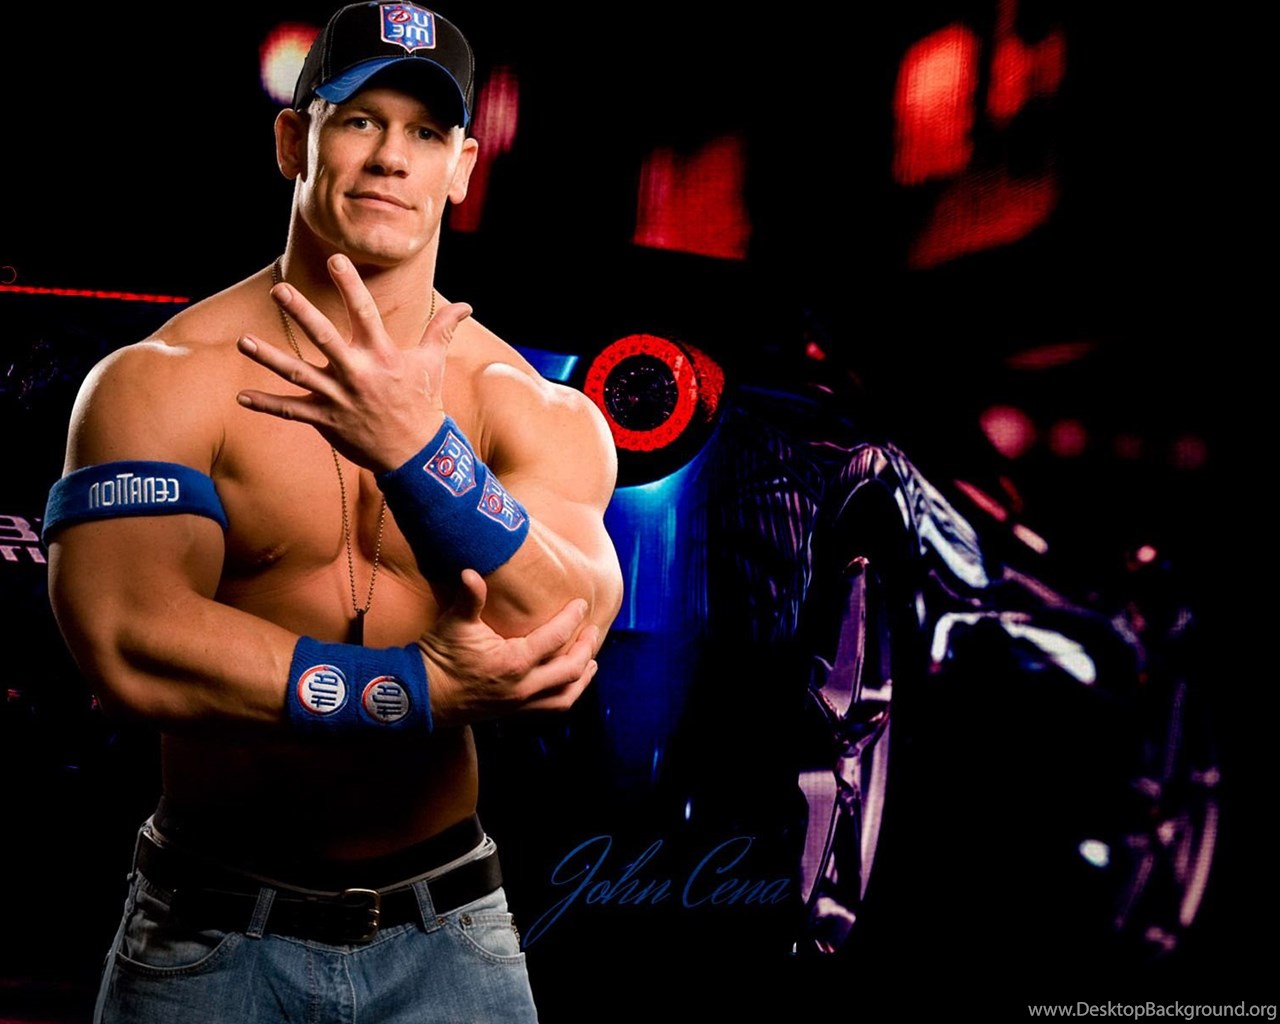 john cena hd wallpapers 1366x768,barechested,muscle,arm,chest,human body